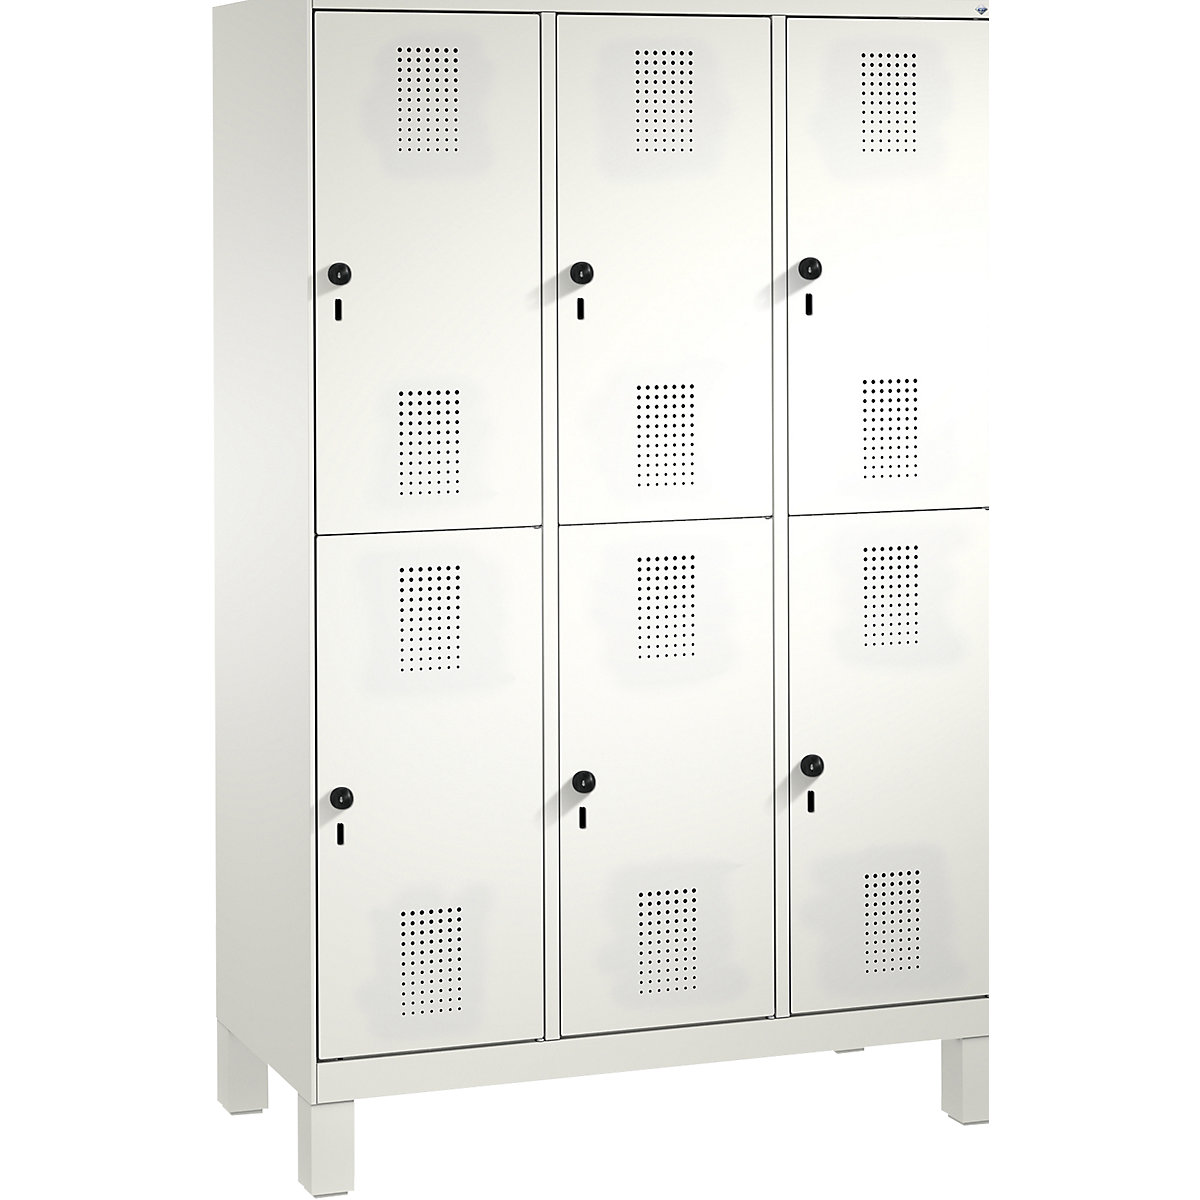 EVOLO cloakroom locker, double tier, with feet – C+P, 3 compartments, 2 shelf compartments each, compartment width 400 mm, traffic white / traffic white-13